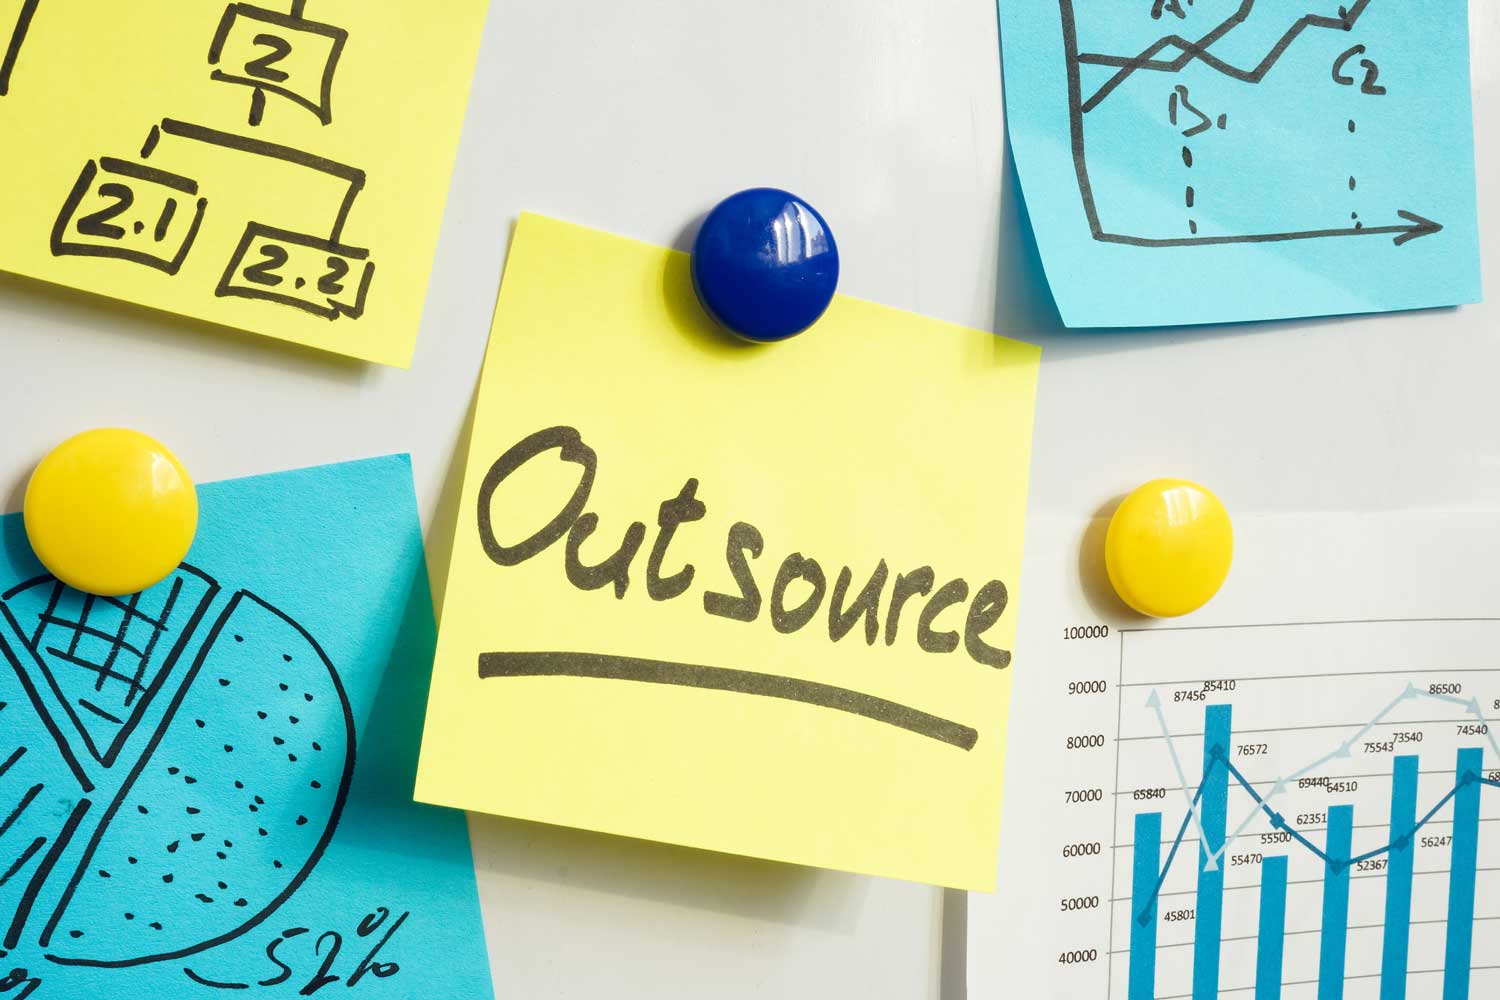 5 reasons why outsourcing can boost your business performance